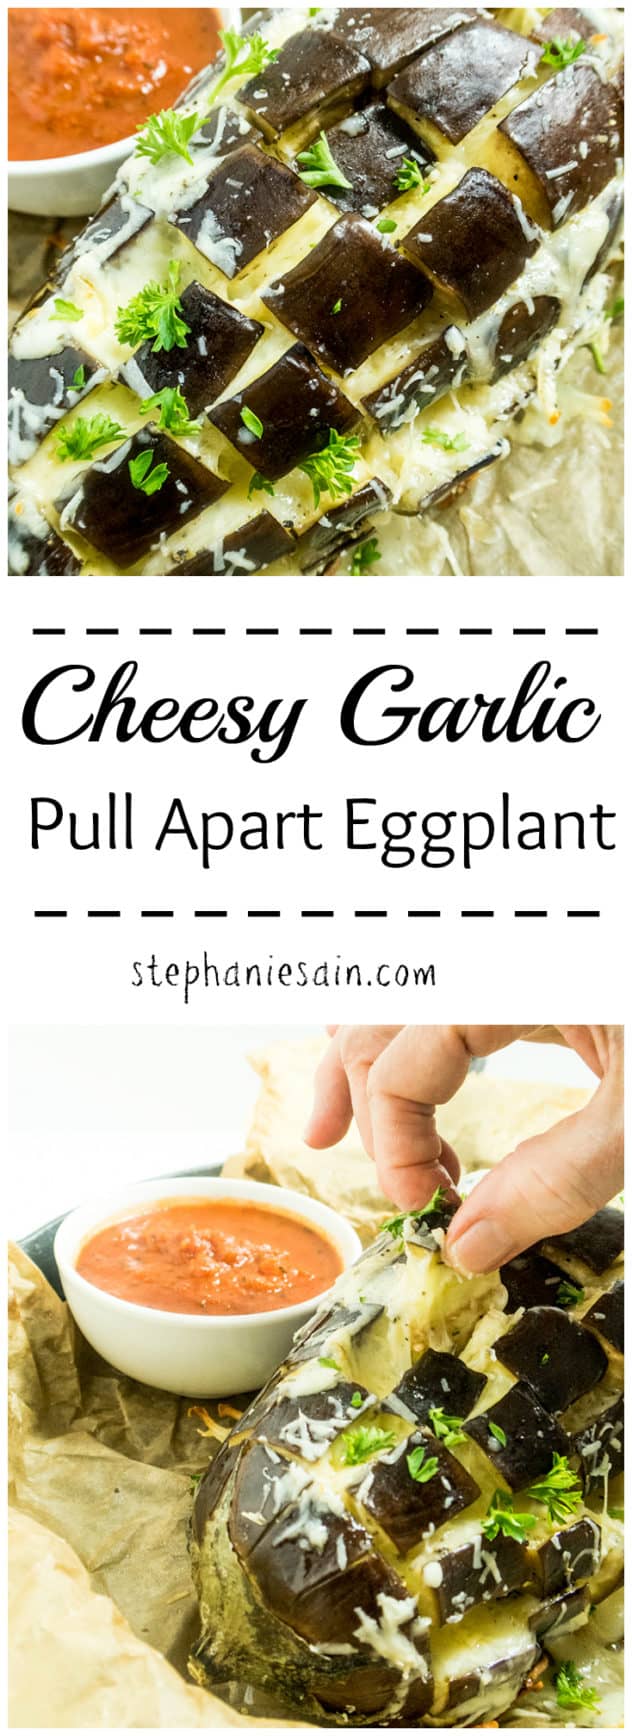 Cheesy Garlic Pull Apart Eggplant is an easy to prepare tasty appetizer or main course option. Low in carbs, vegetarian, and gluten free.